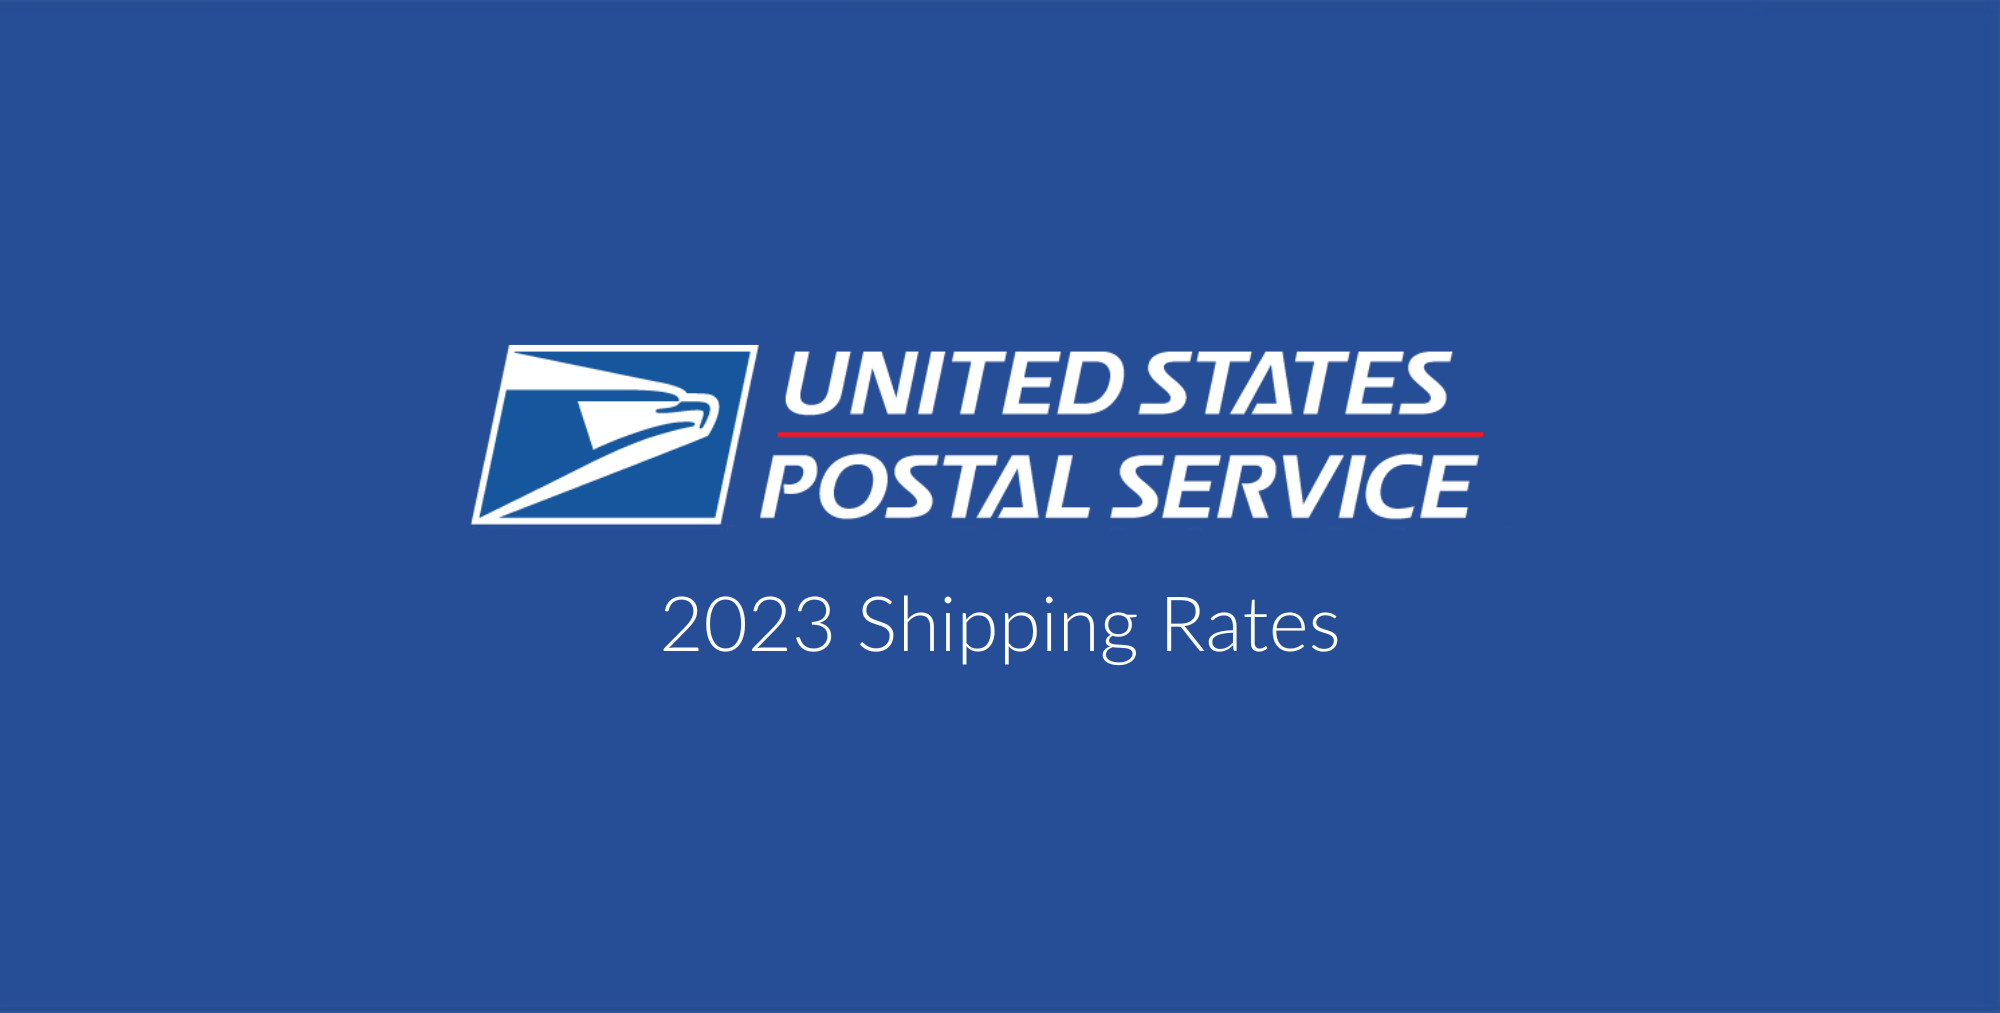 2023 usps shipping rates changes blog header with USPS logo and white 2023 shipping rates text